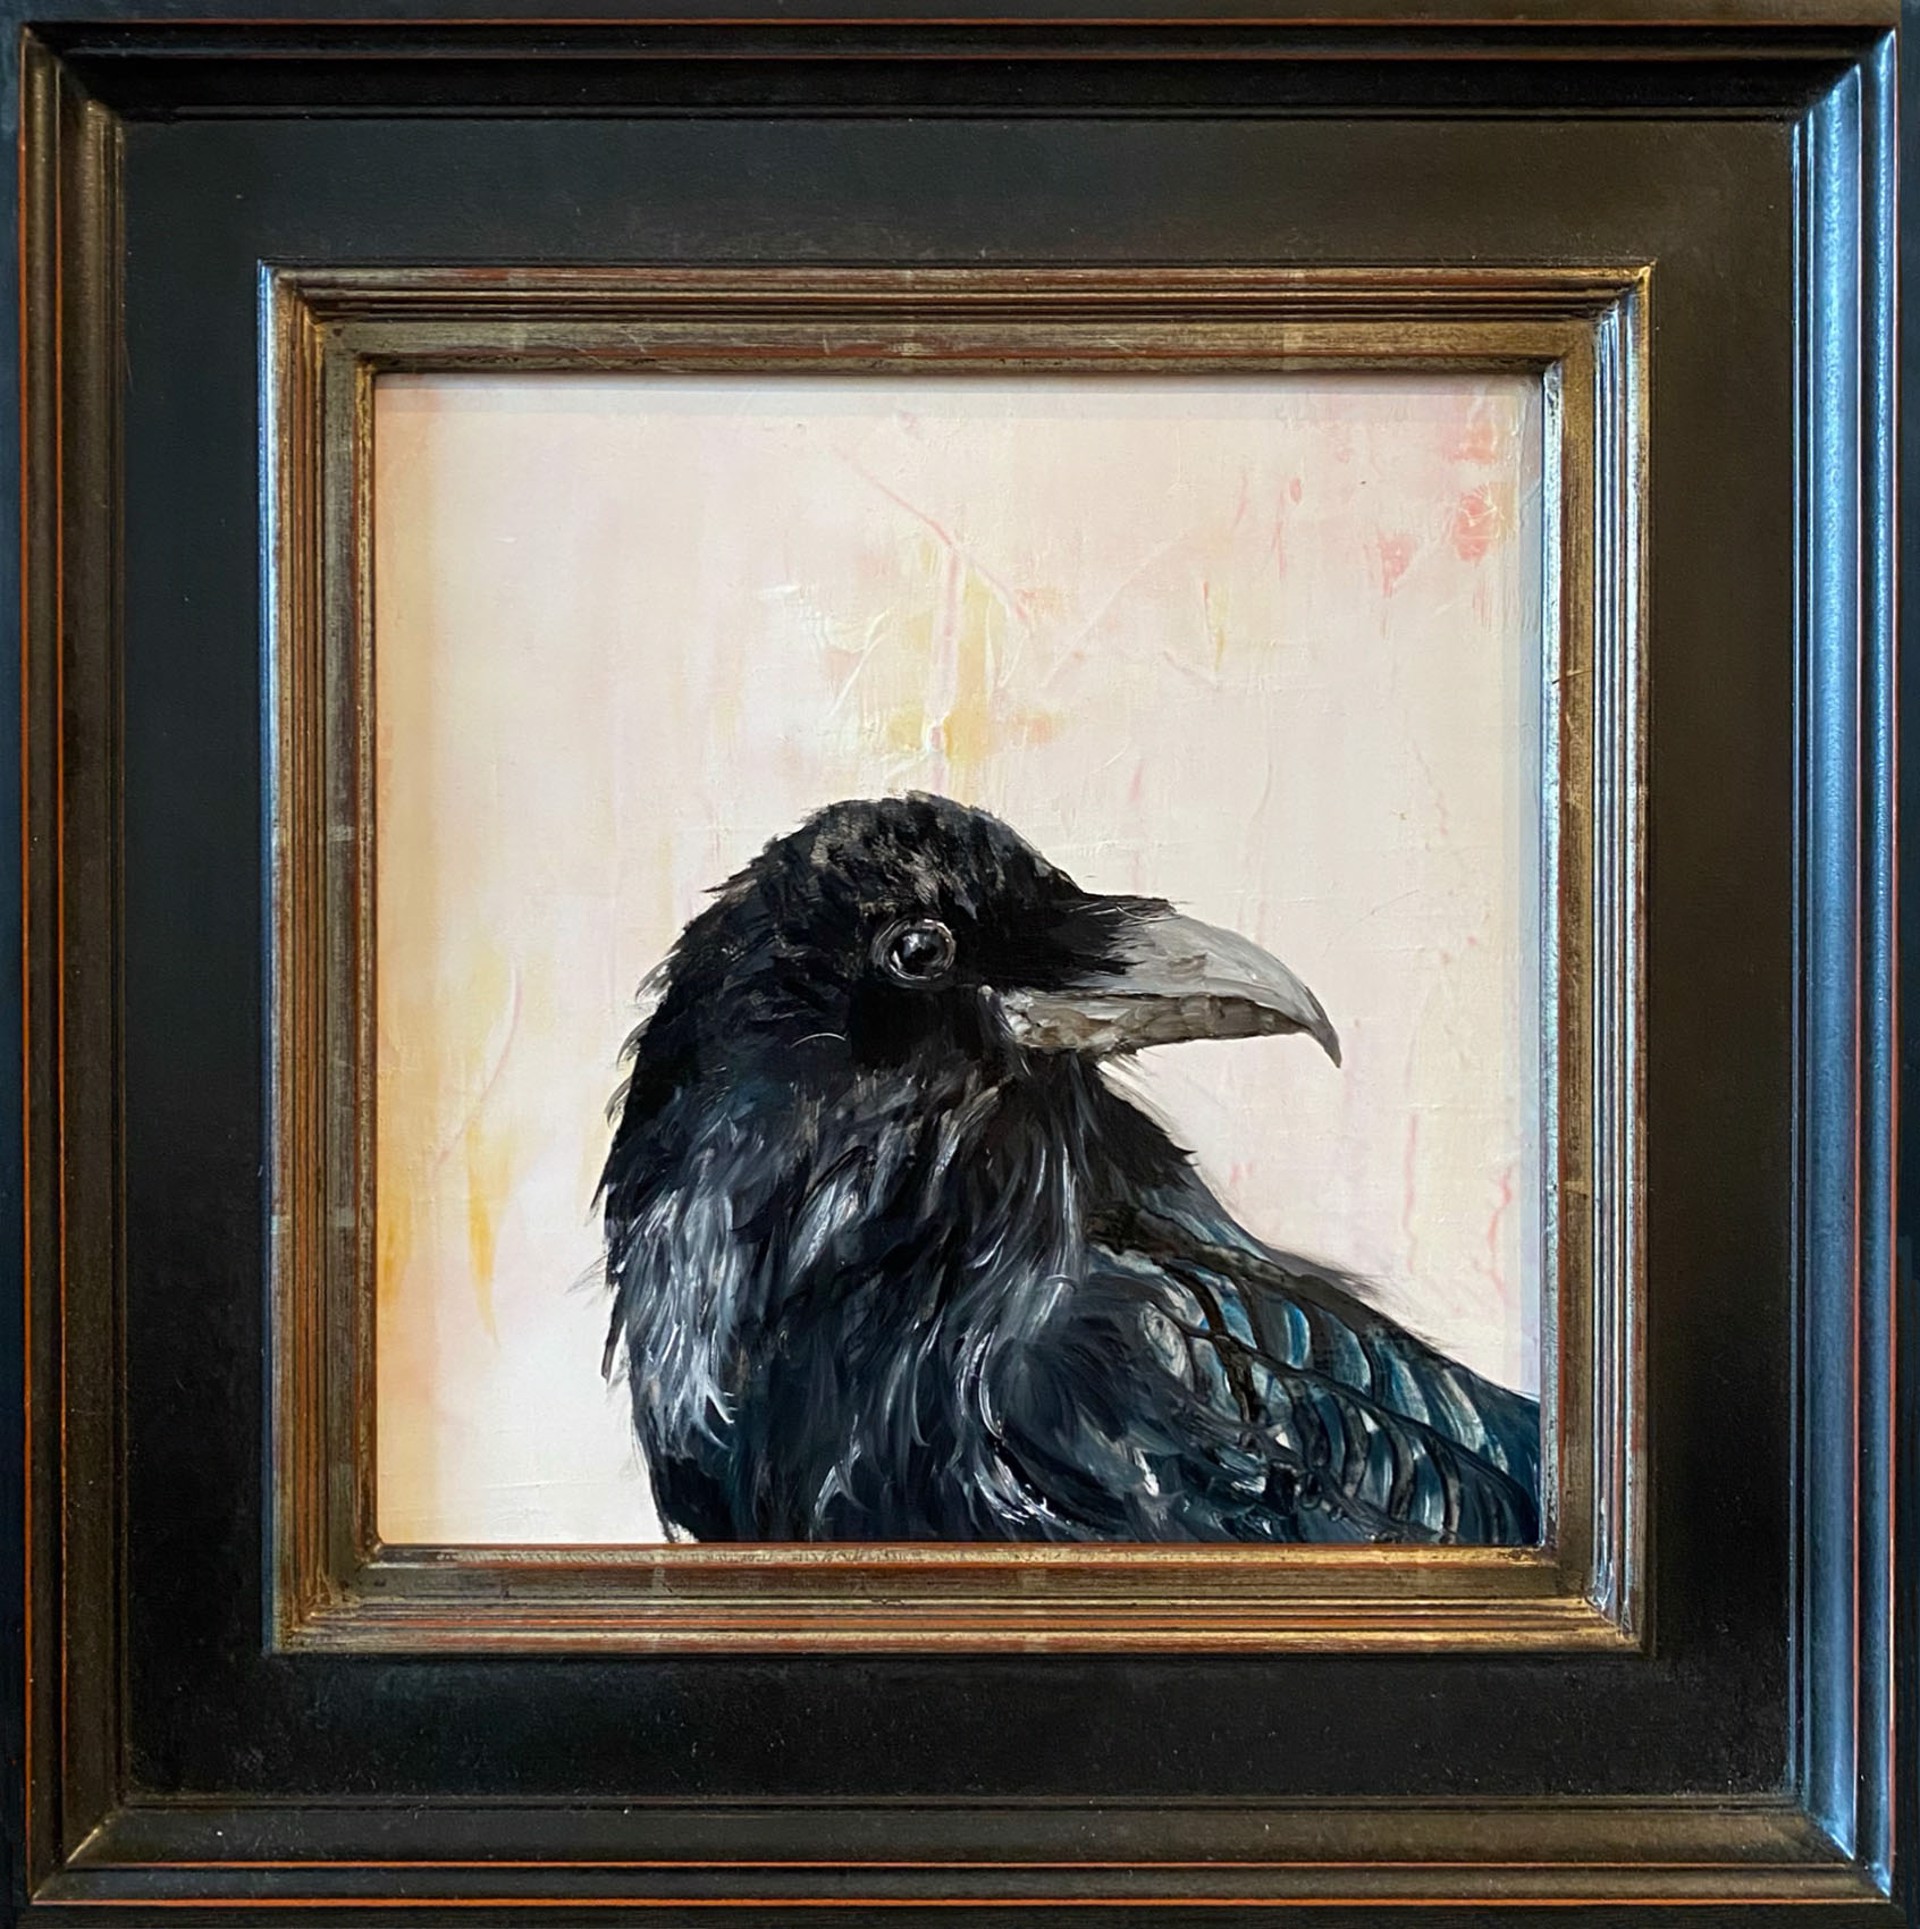 An Oil Painting Of A Raven Portrait With A Contemporary Light Pink And Cream Background